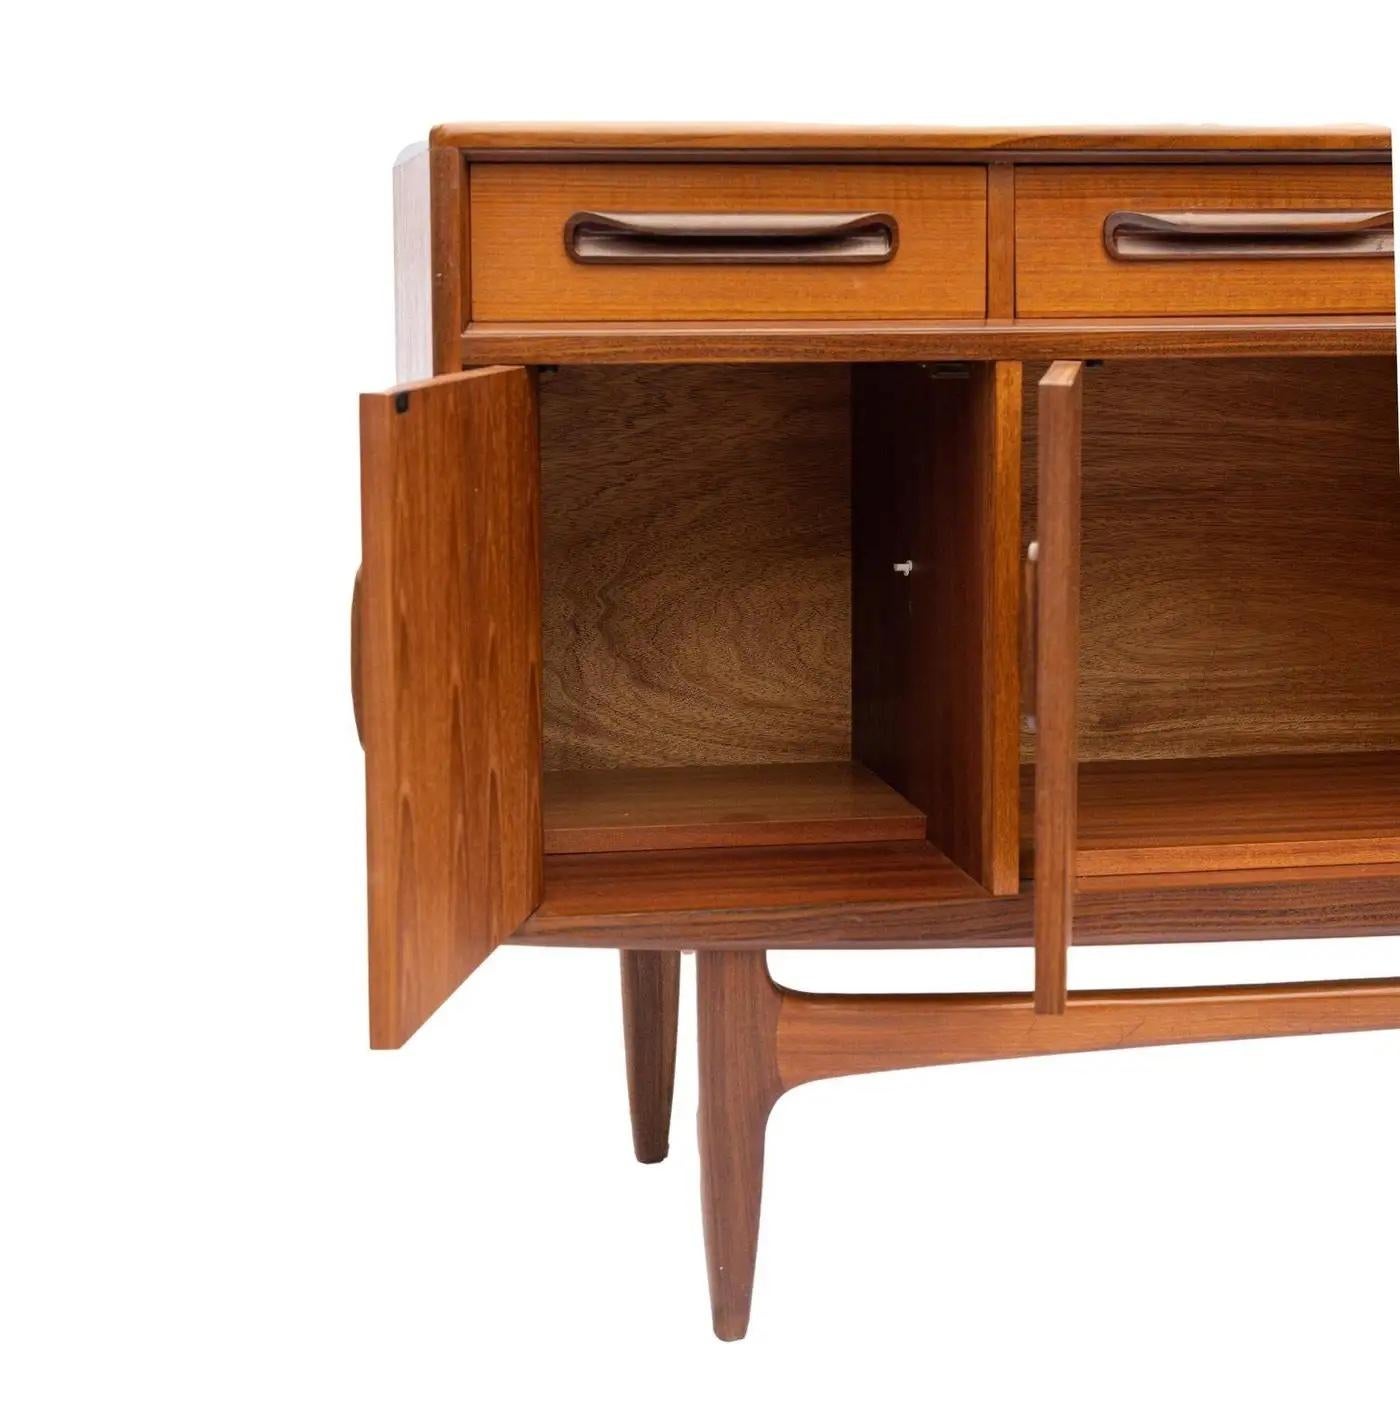 Mid-Century Teak Fresco Sideboard by v. Wilkins for G Plan, English, Ca. 1960 For Sale 1